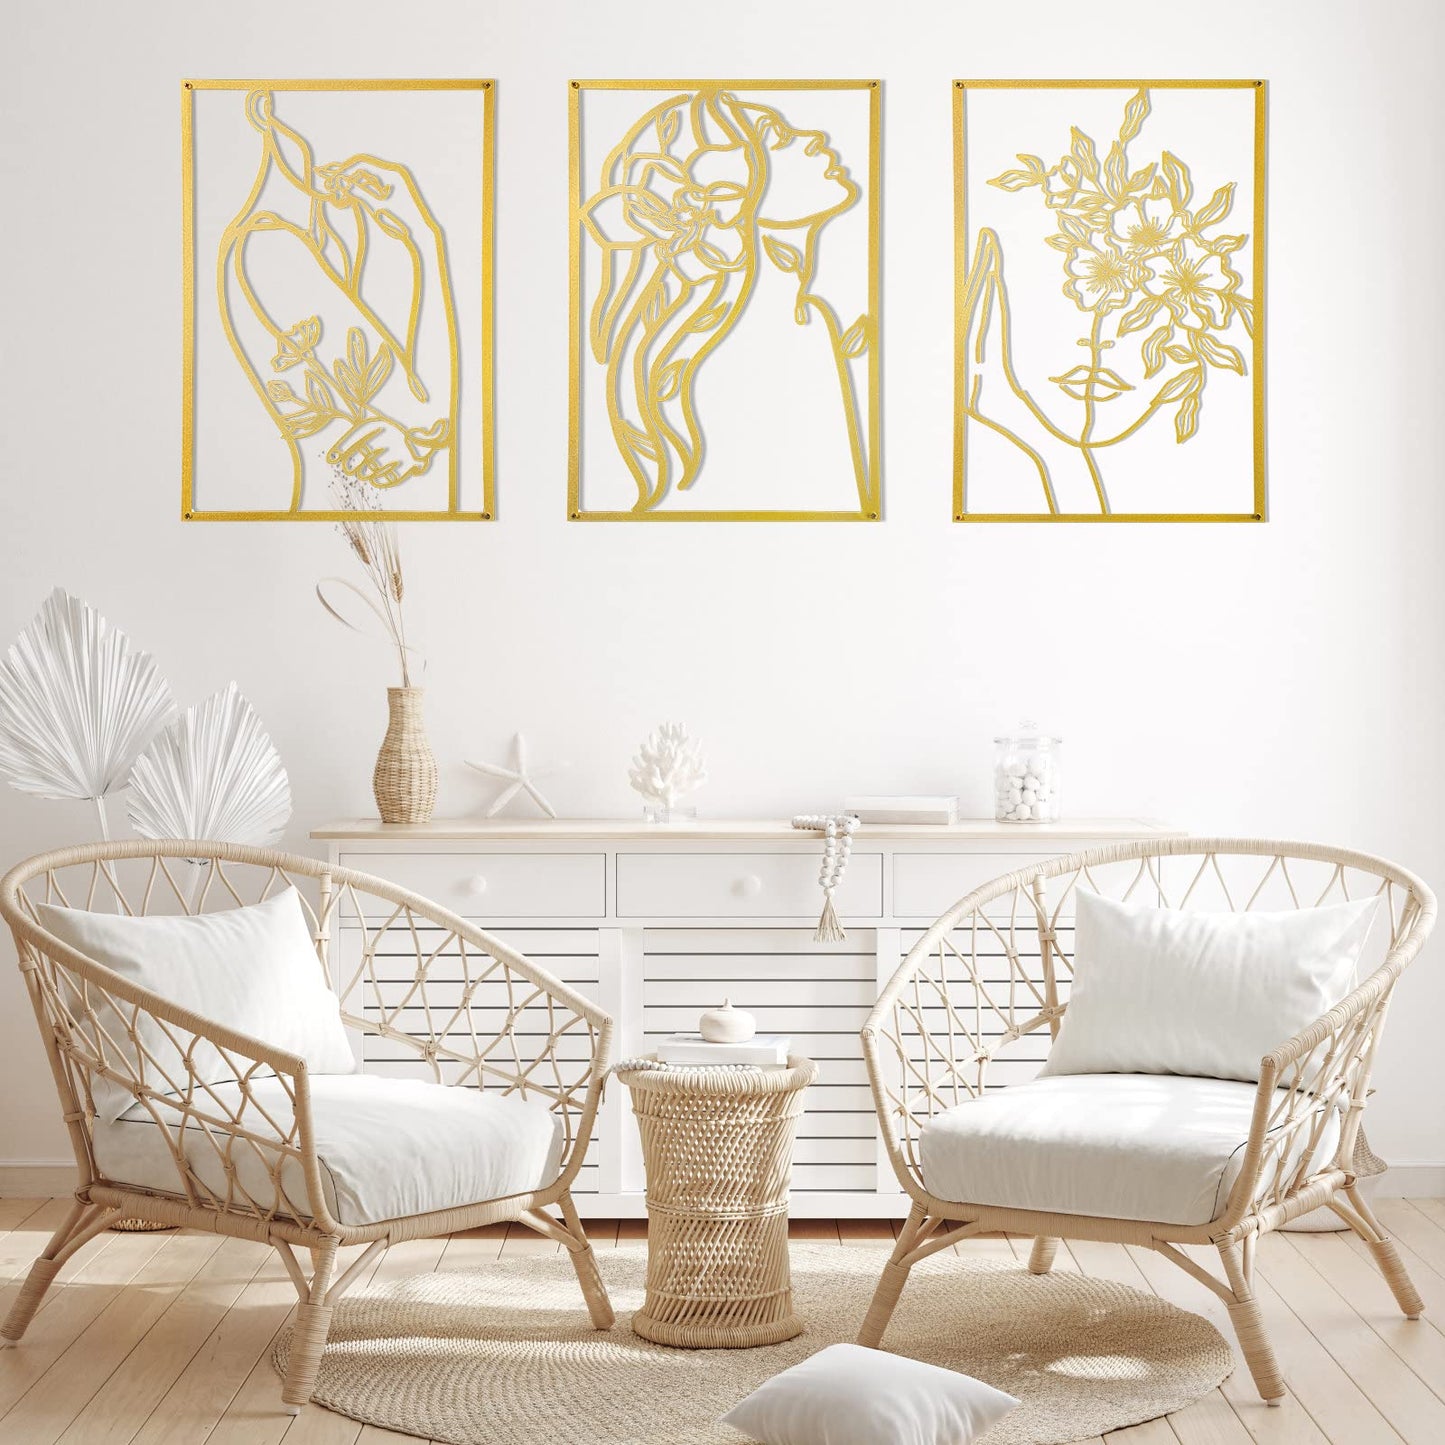 AGIOTA 3 Pcs Gold Wall Decor Above Bed Minimalist for Living Room Metal Line Art - Female Body, Gold Room Decor for Bedroom Modern Wall Art for Indoor 15inch